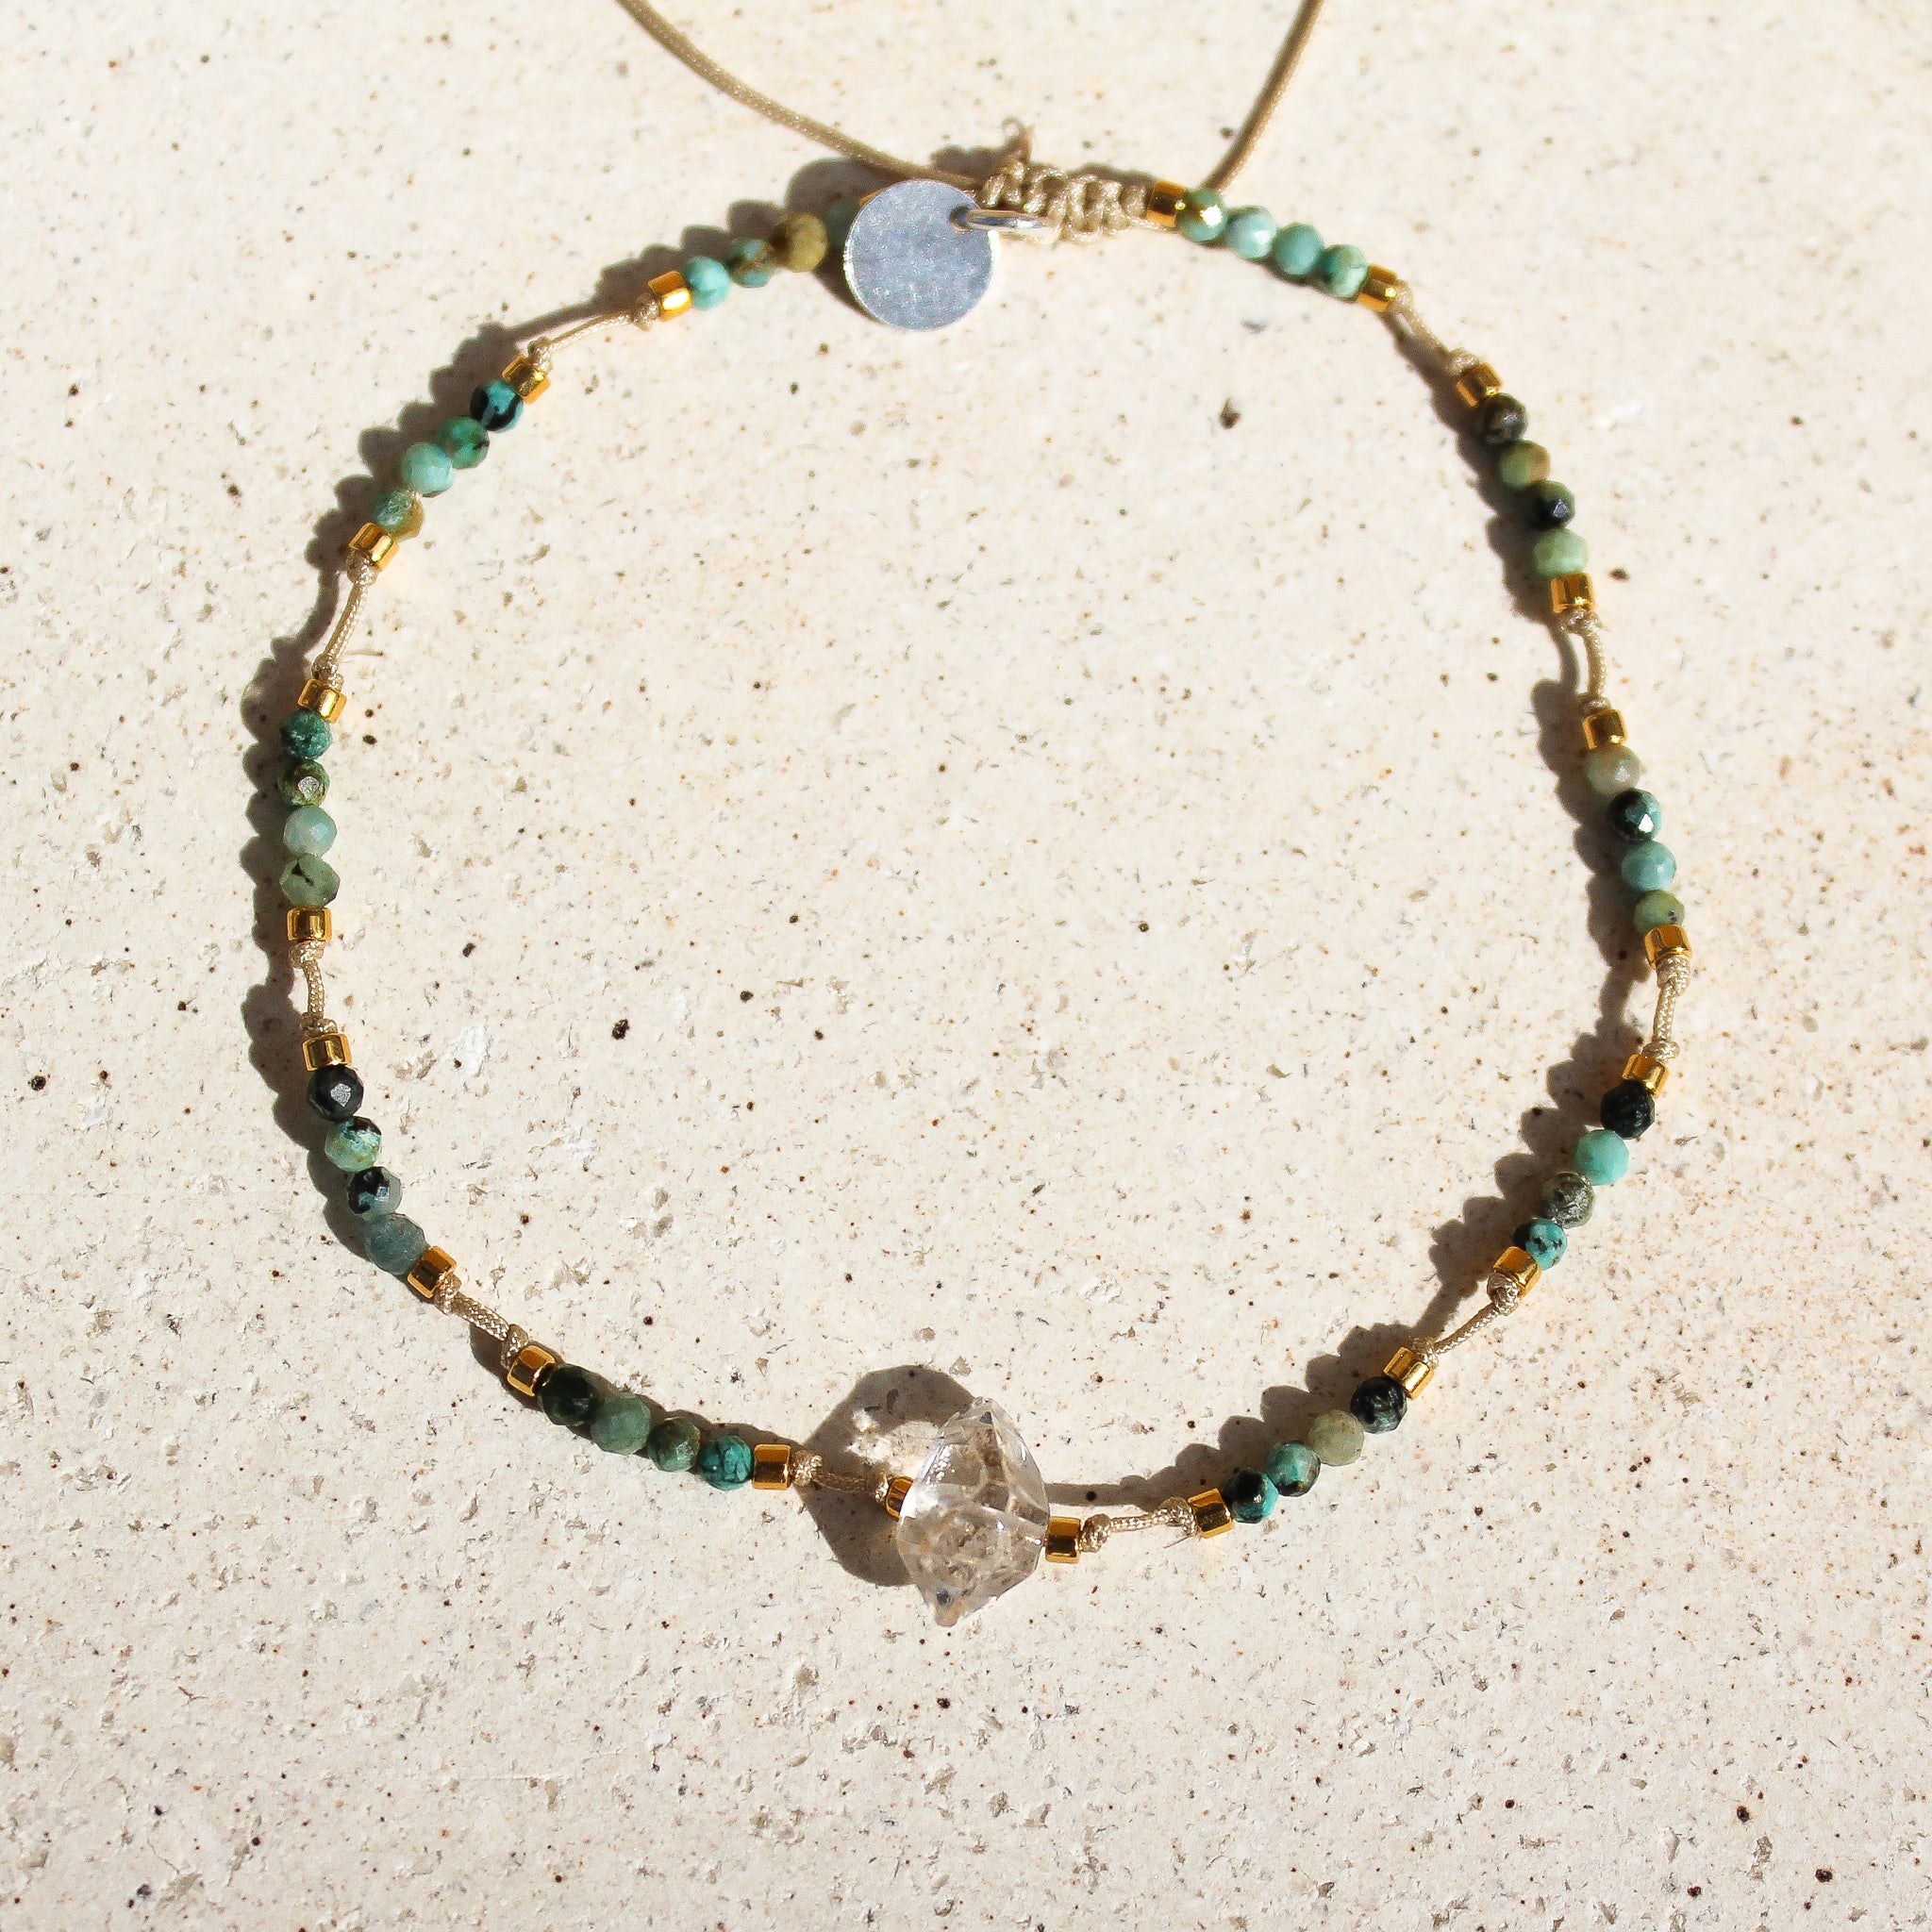 BEADS ANKLET - TURQUOISE & HERKIMER